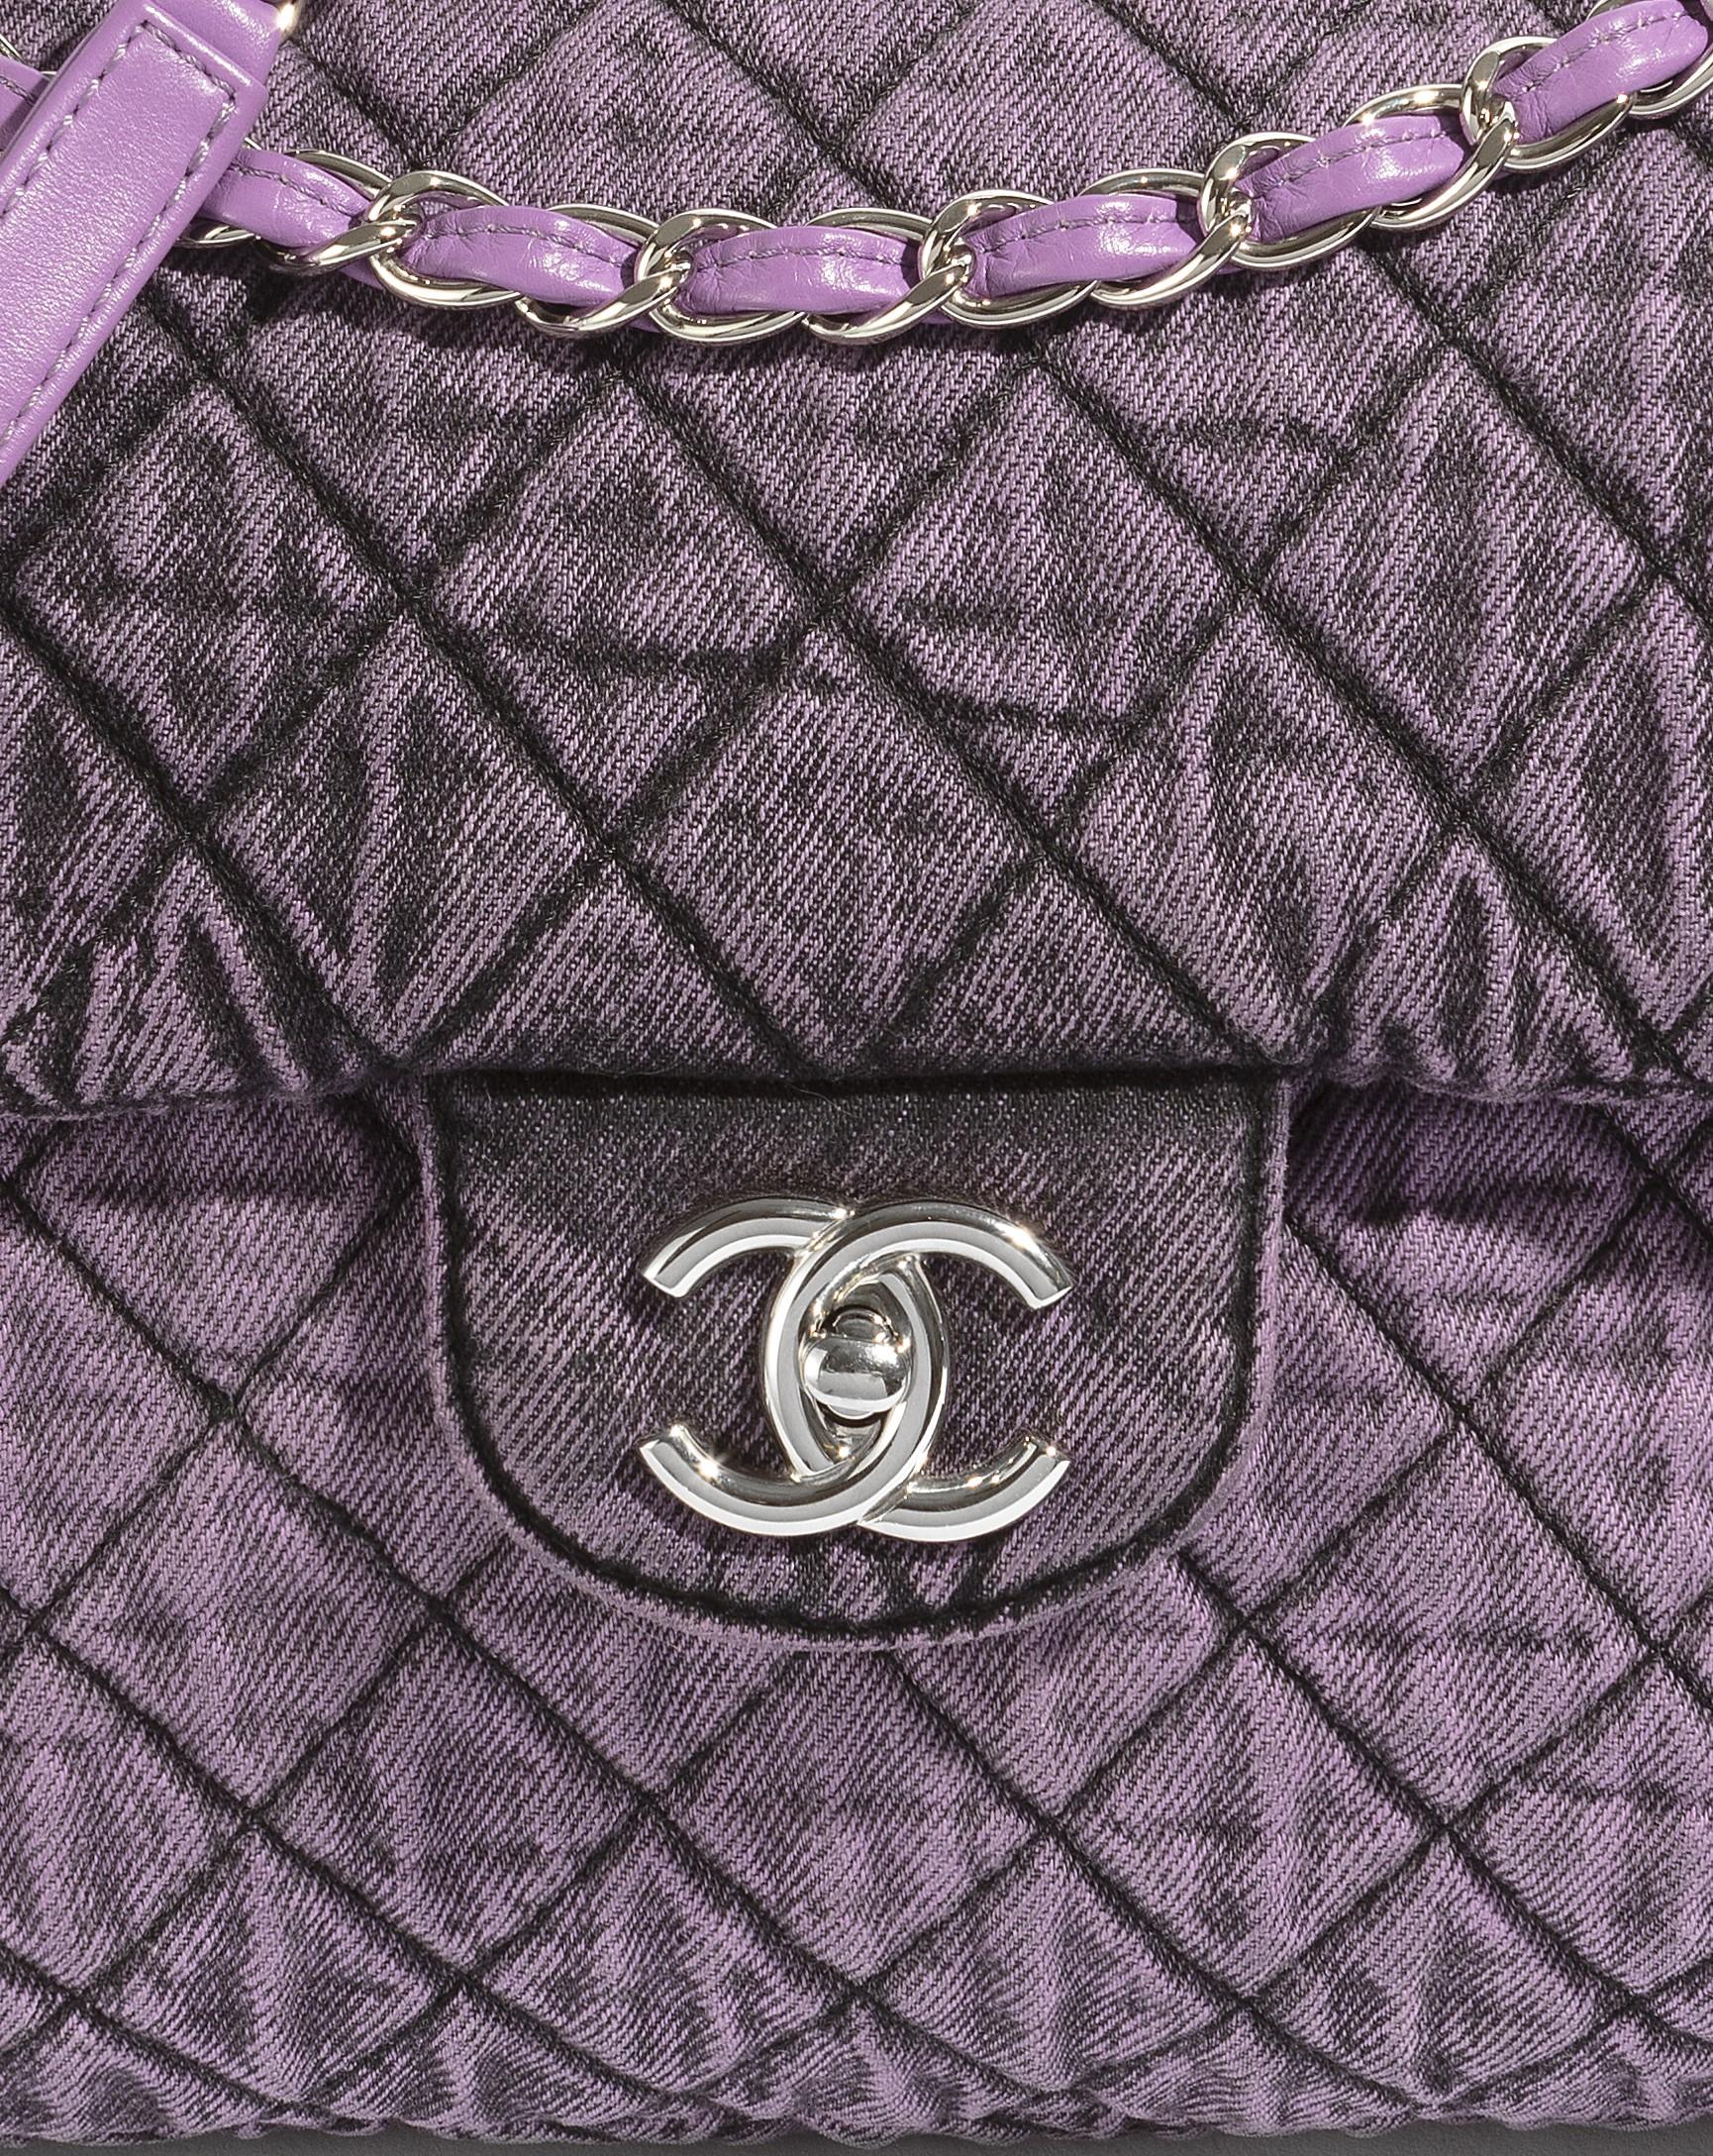 Chanel Denimpressions Flap Bag, Preowned In Dustbag